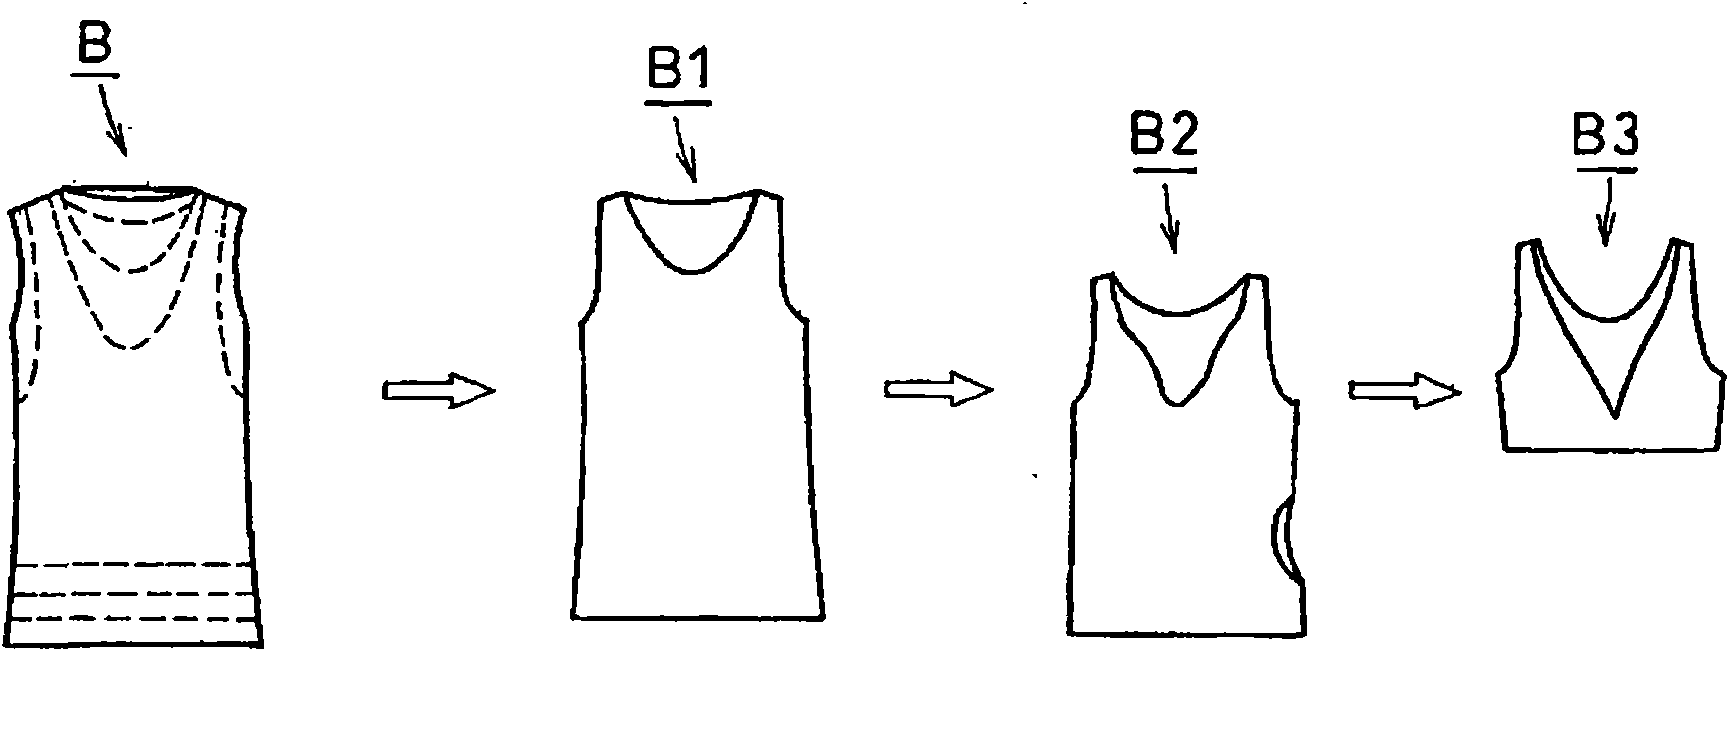 Clothes capable of being freely cut